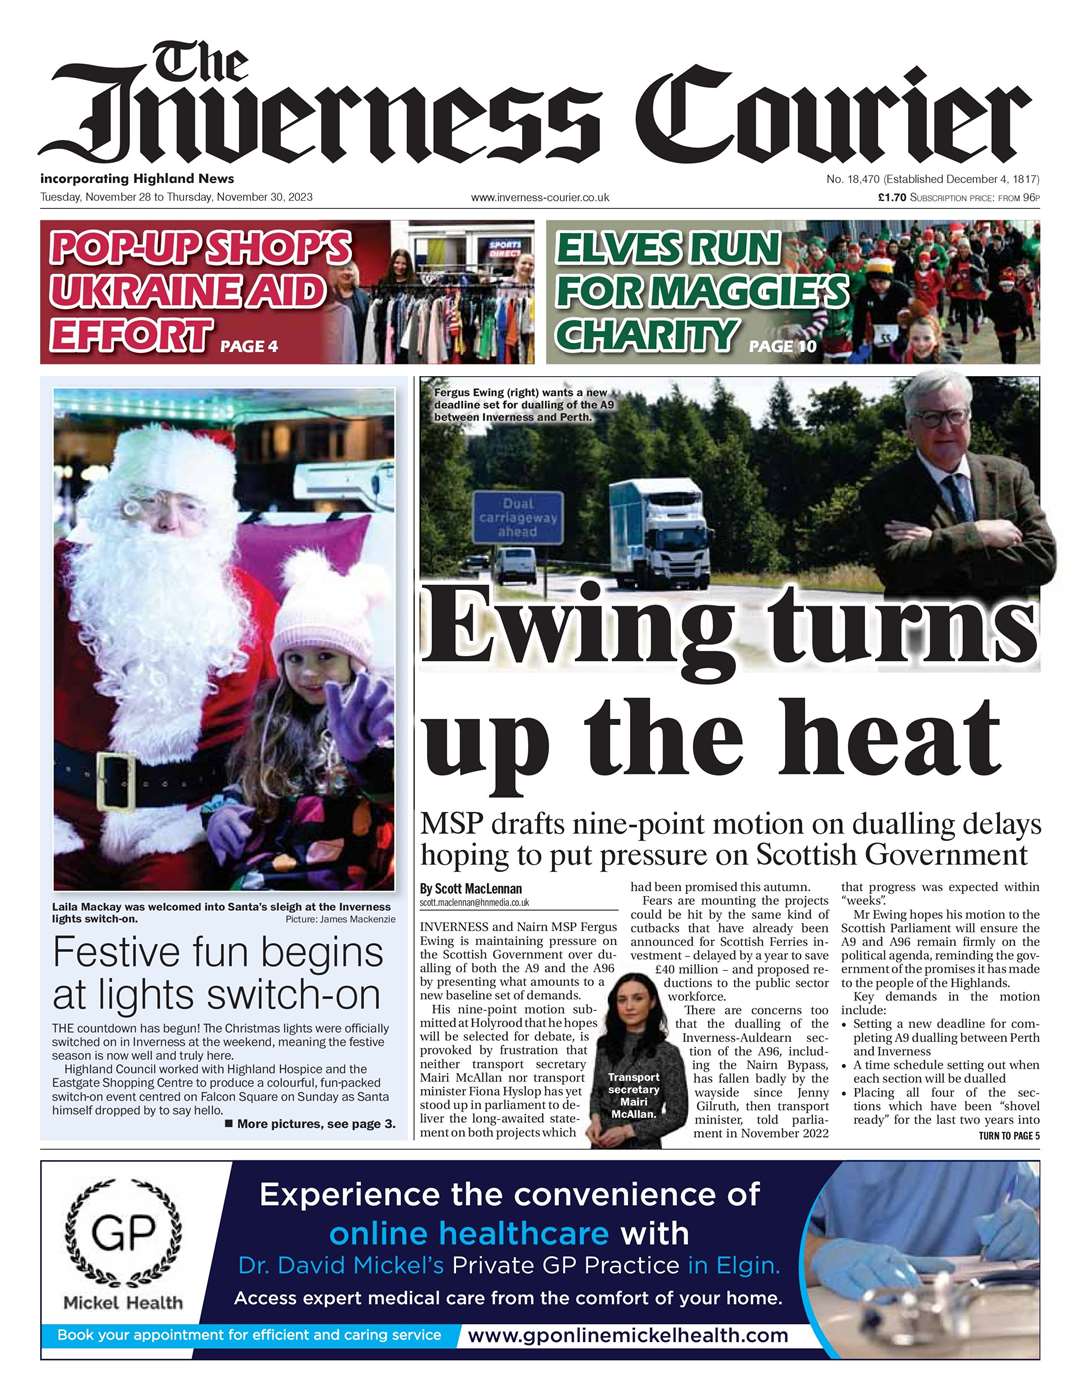 The Inverness Courier, November 28, front page.